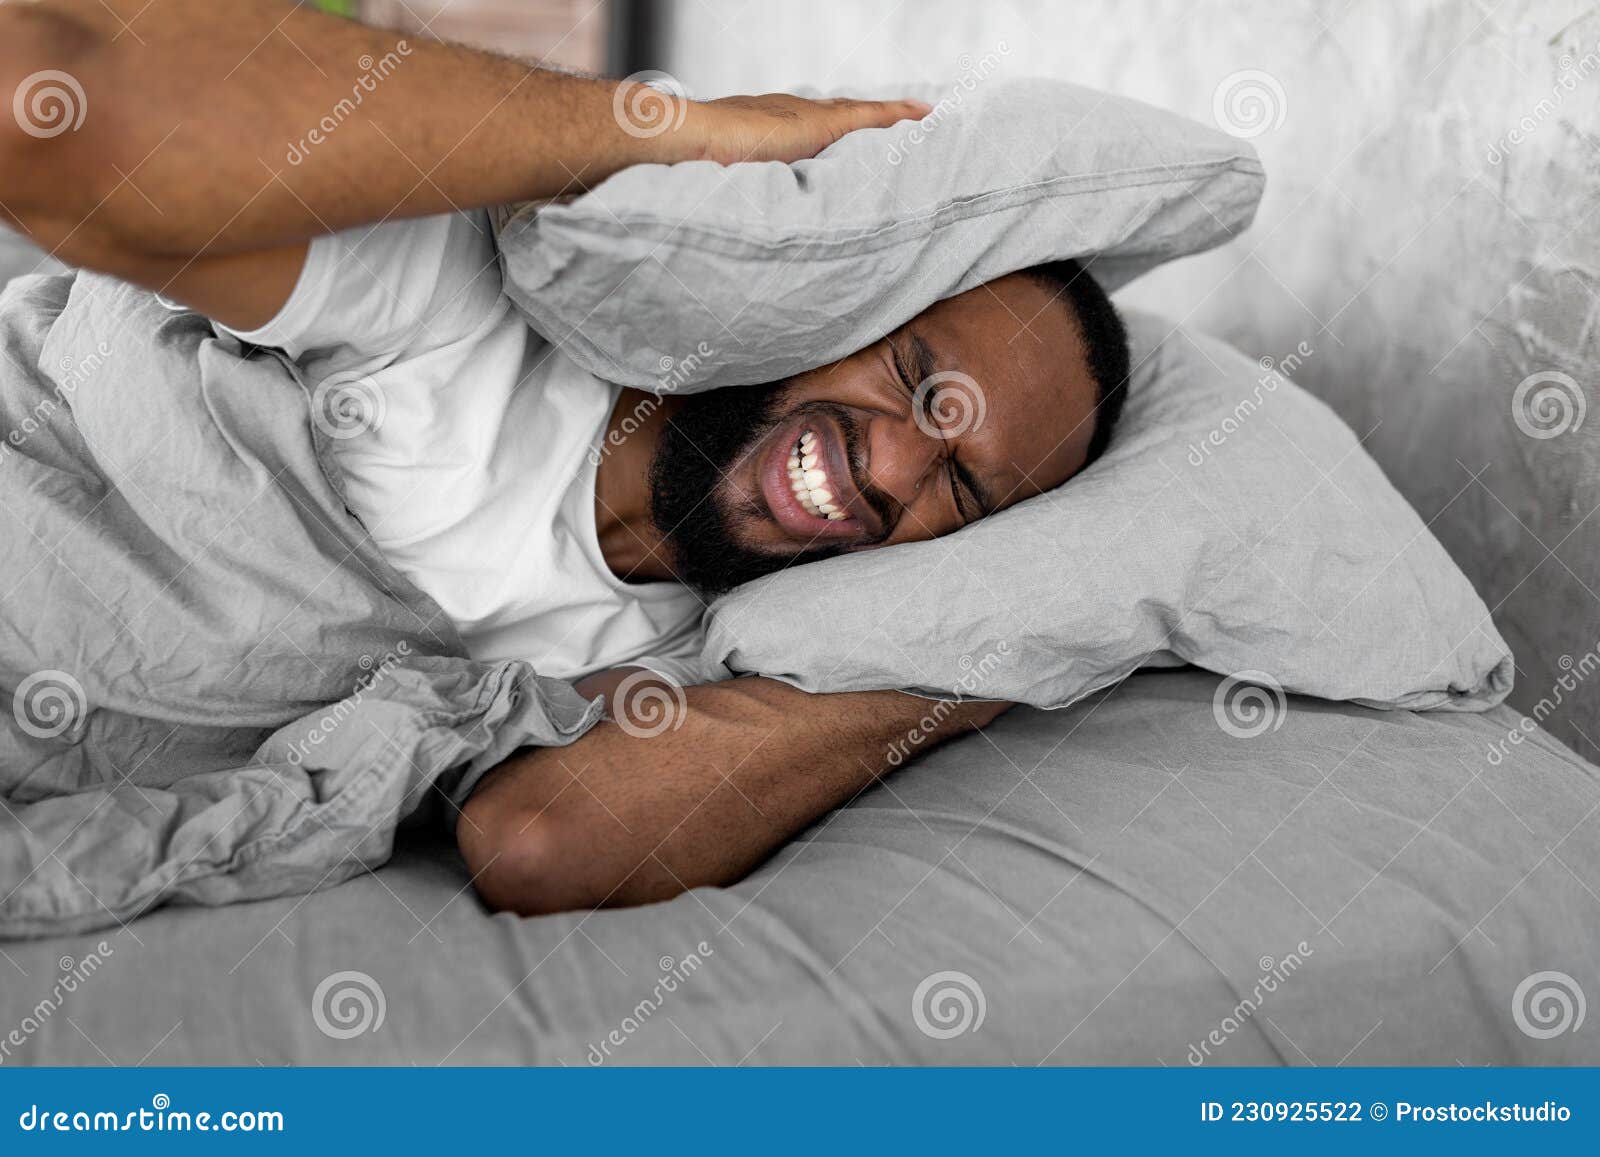 stressed-black-man-covering-ears-lying-bed-i-can-t-sleep-portrait-irritated-young-black-man-lying-bed-covering-ears-230925522.jpg